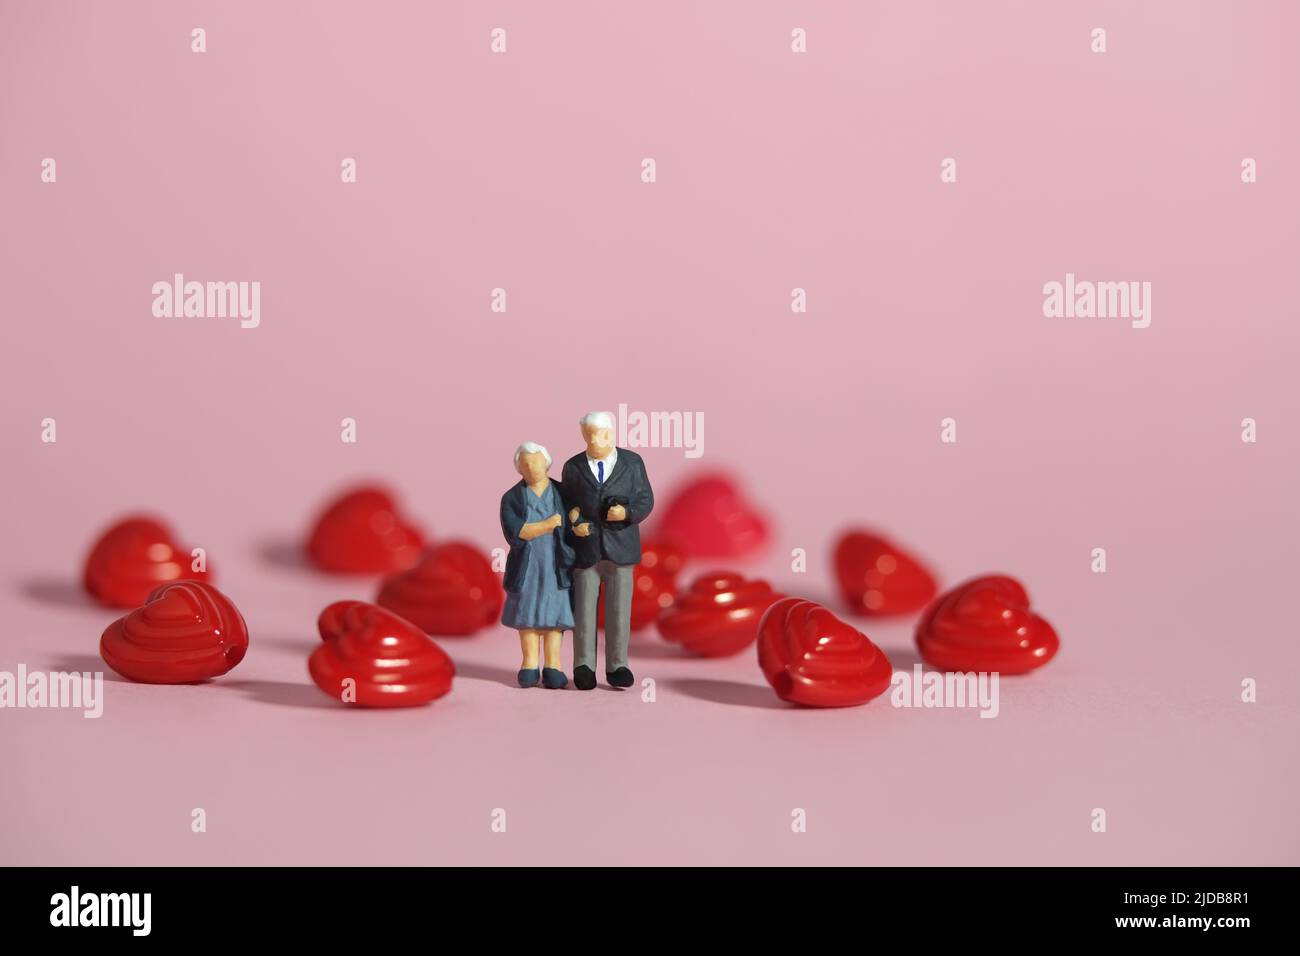 Miniature people toys conceptual photography. Man and women elderly standing in the center of heart shape. Couple in love concept. Image photo Stock Photo